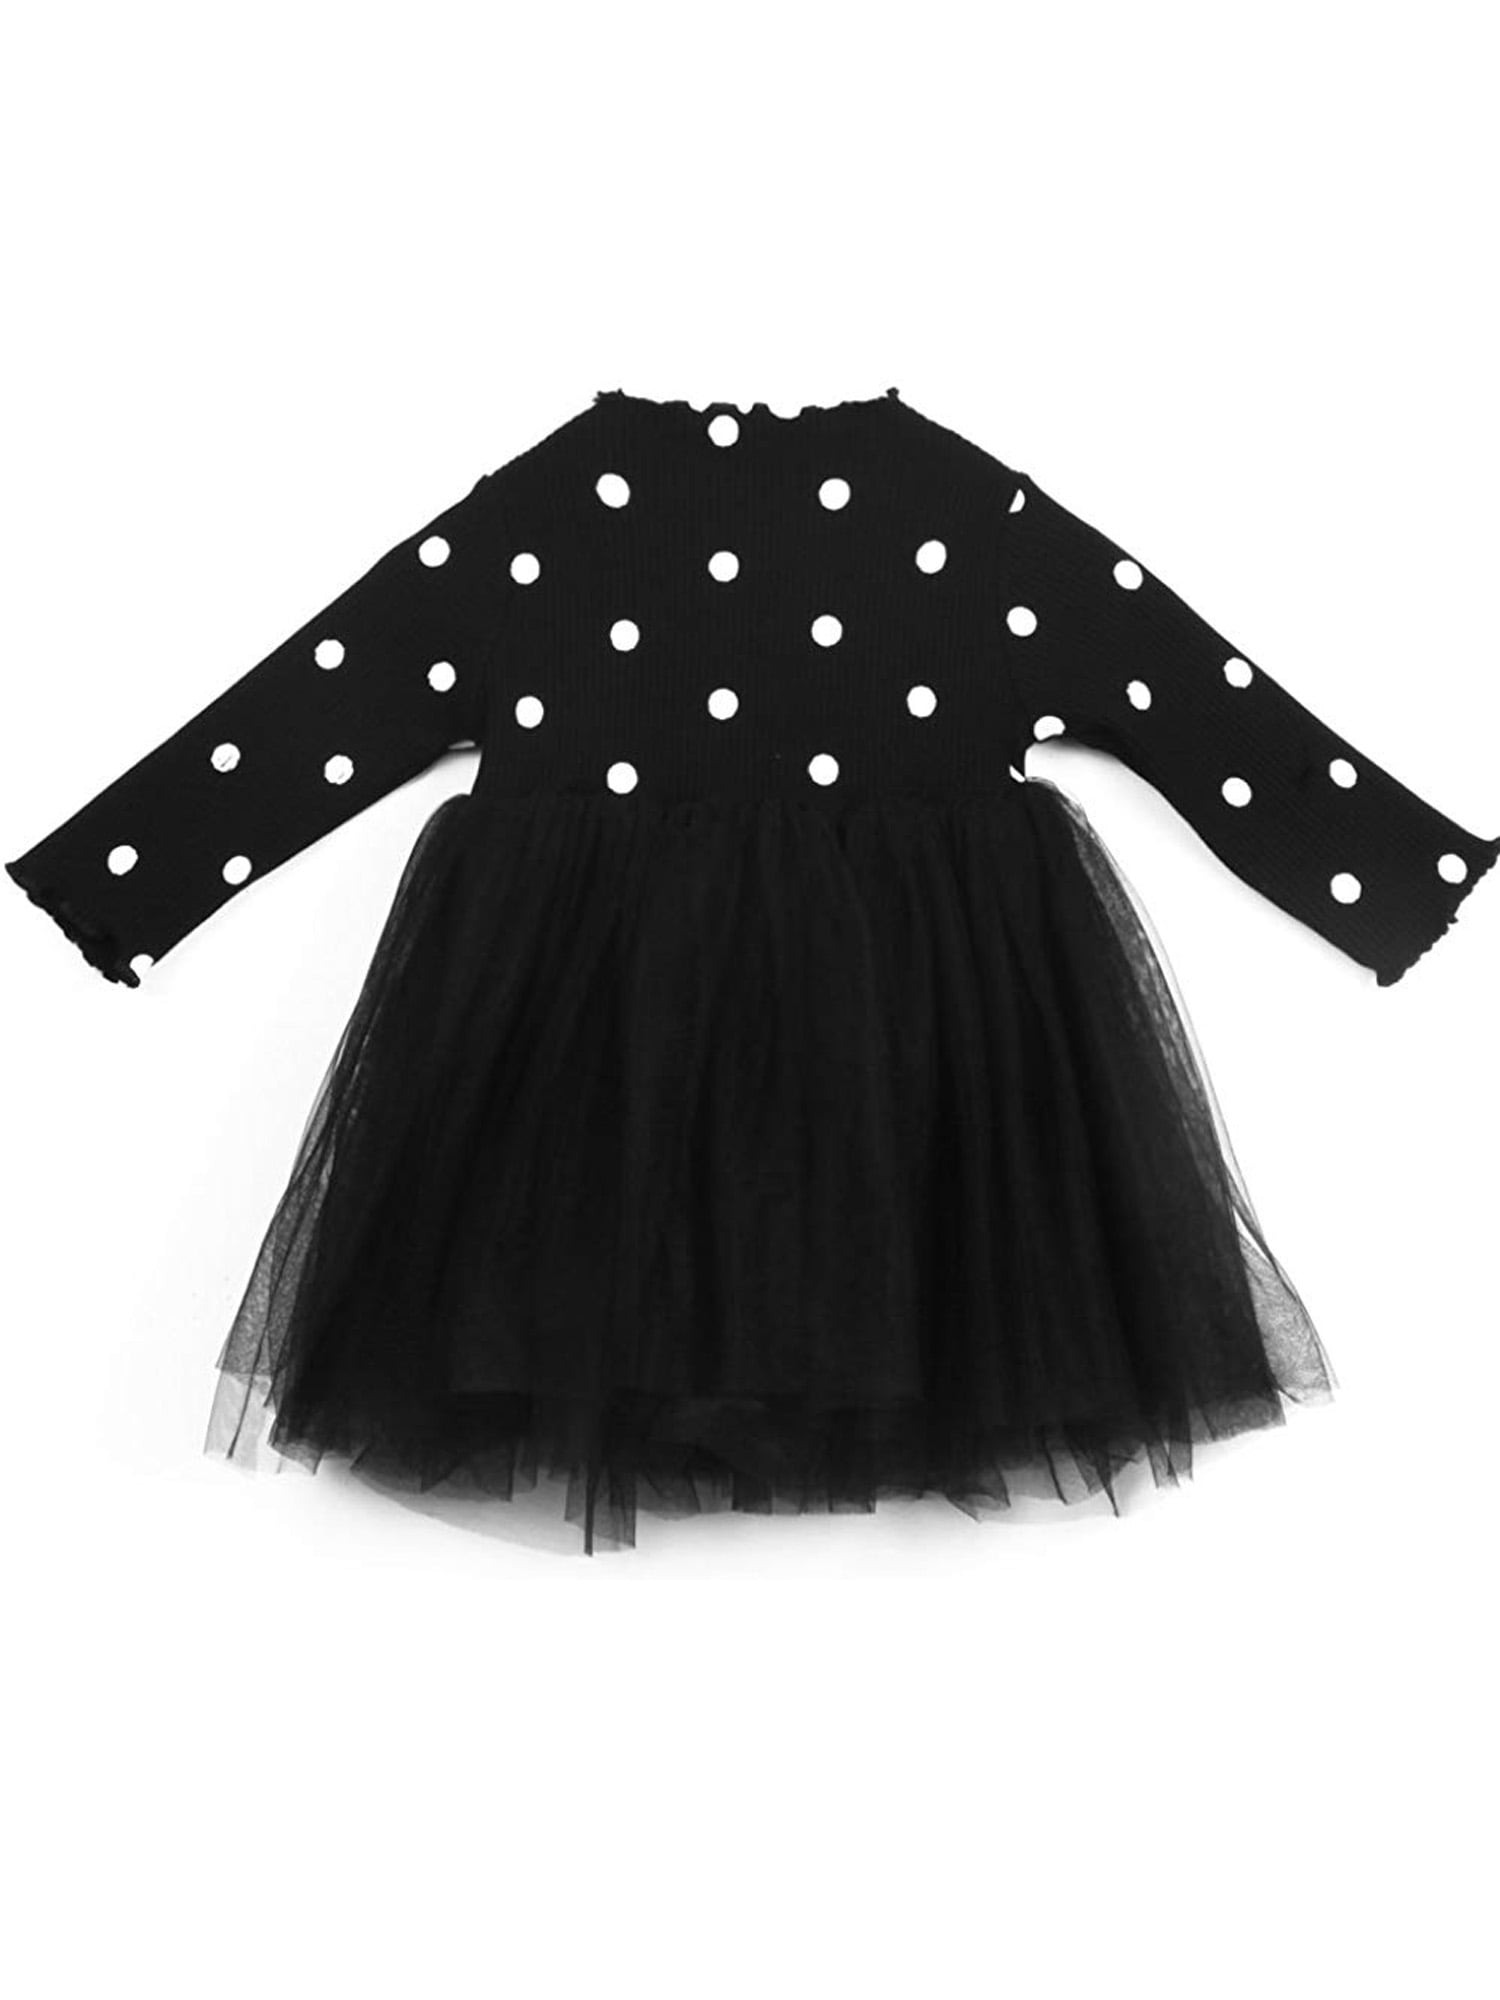 Toddler Baby Girl Floral Long Sleeve Party Yarn Gauze Princess Tutu Dresses Outfit Clothes 